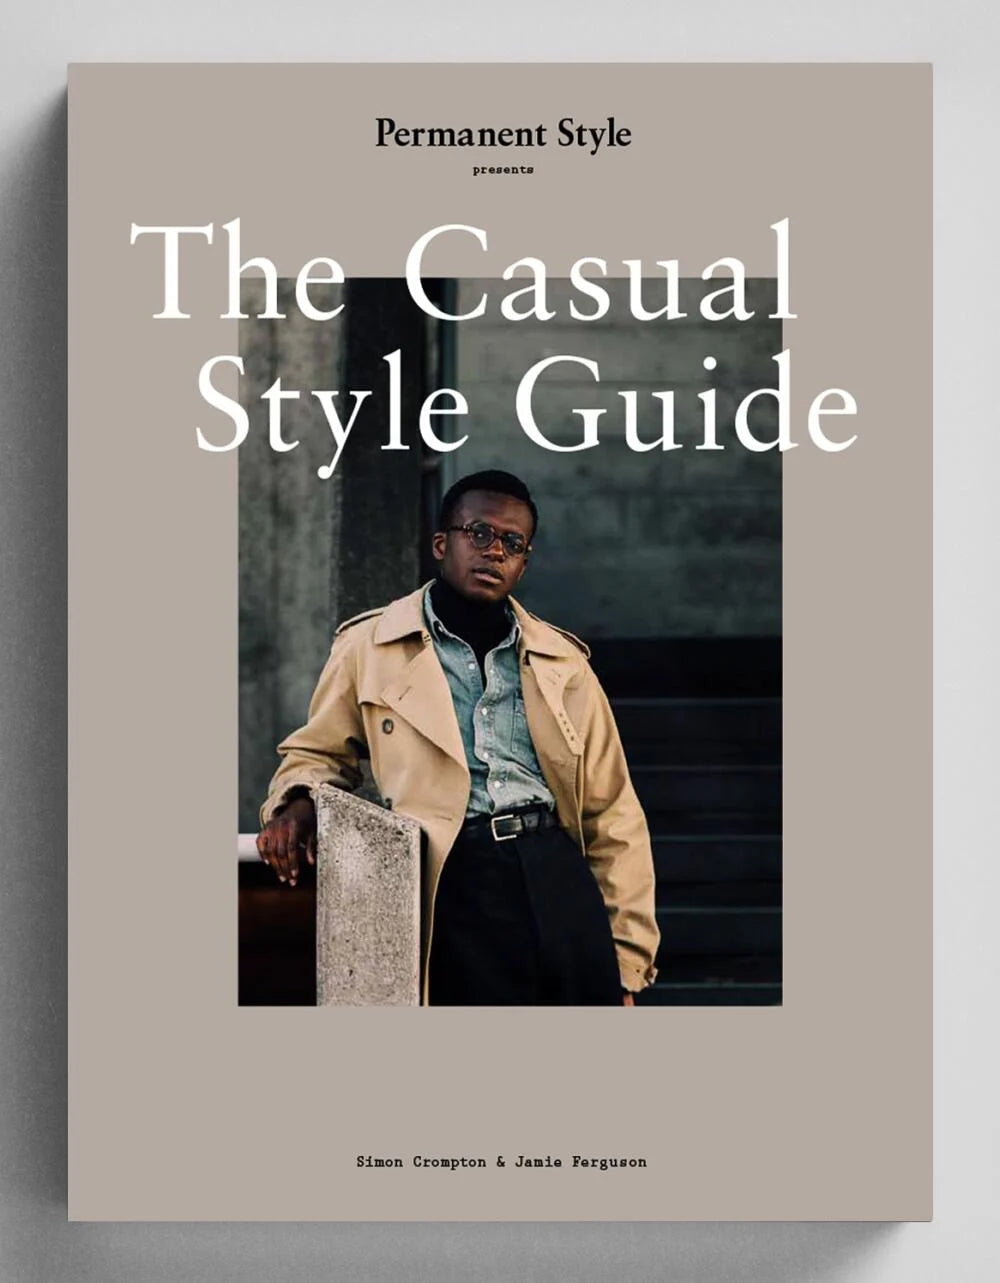 Permanent Style: The Casual Style Guide